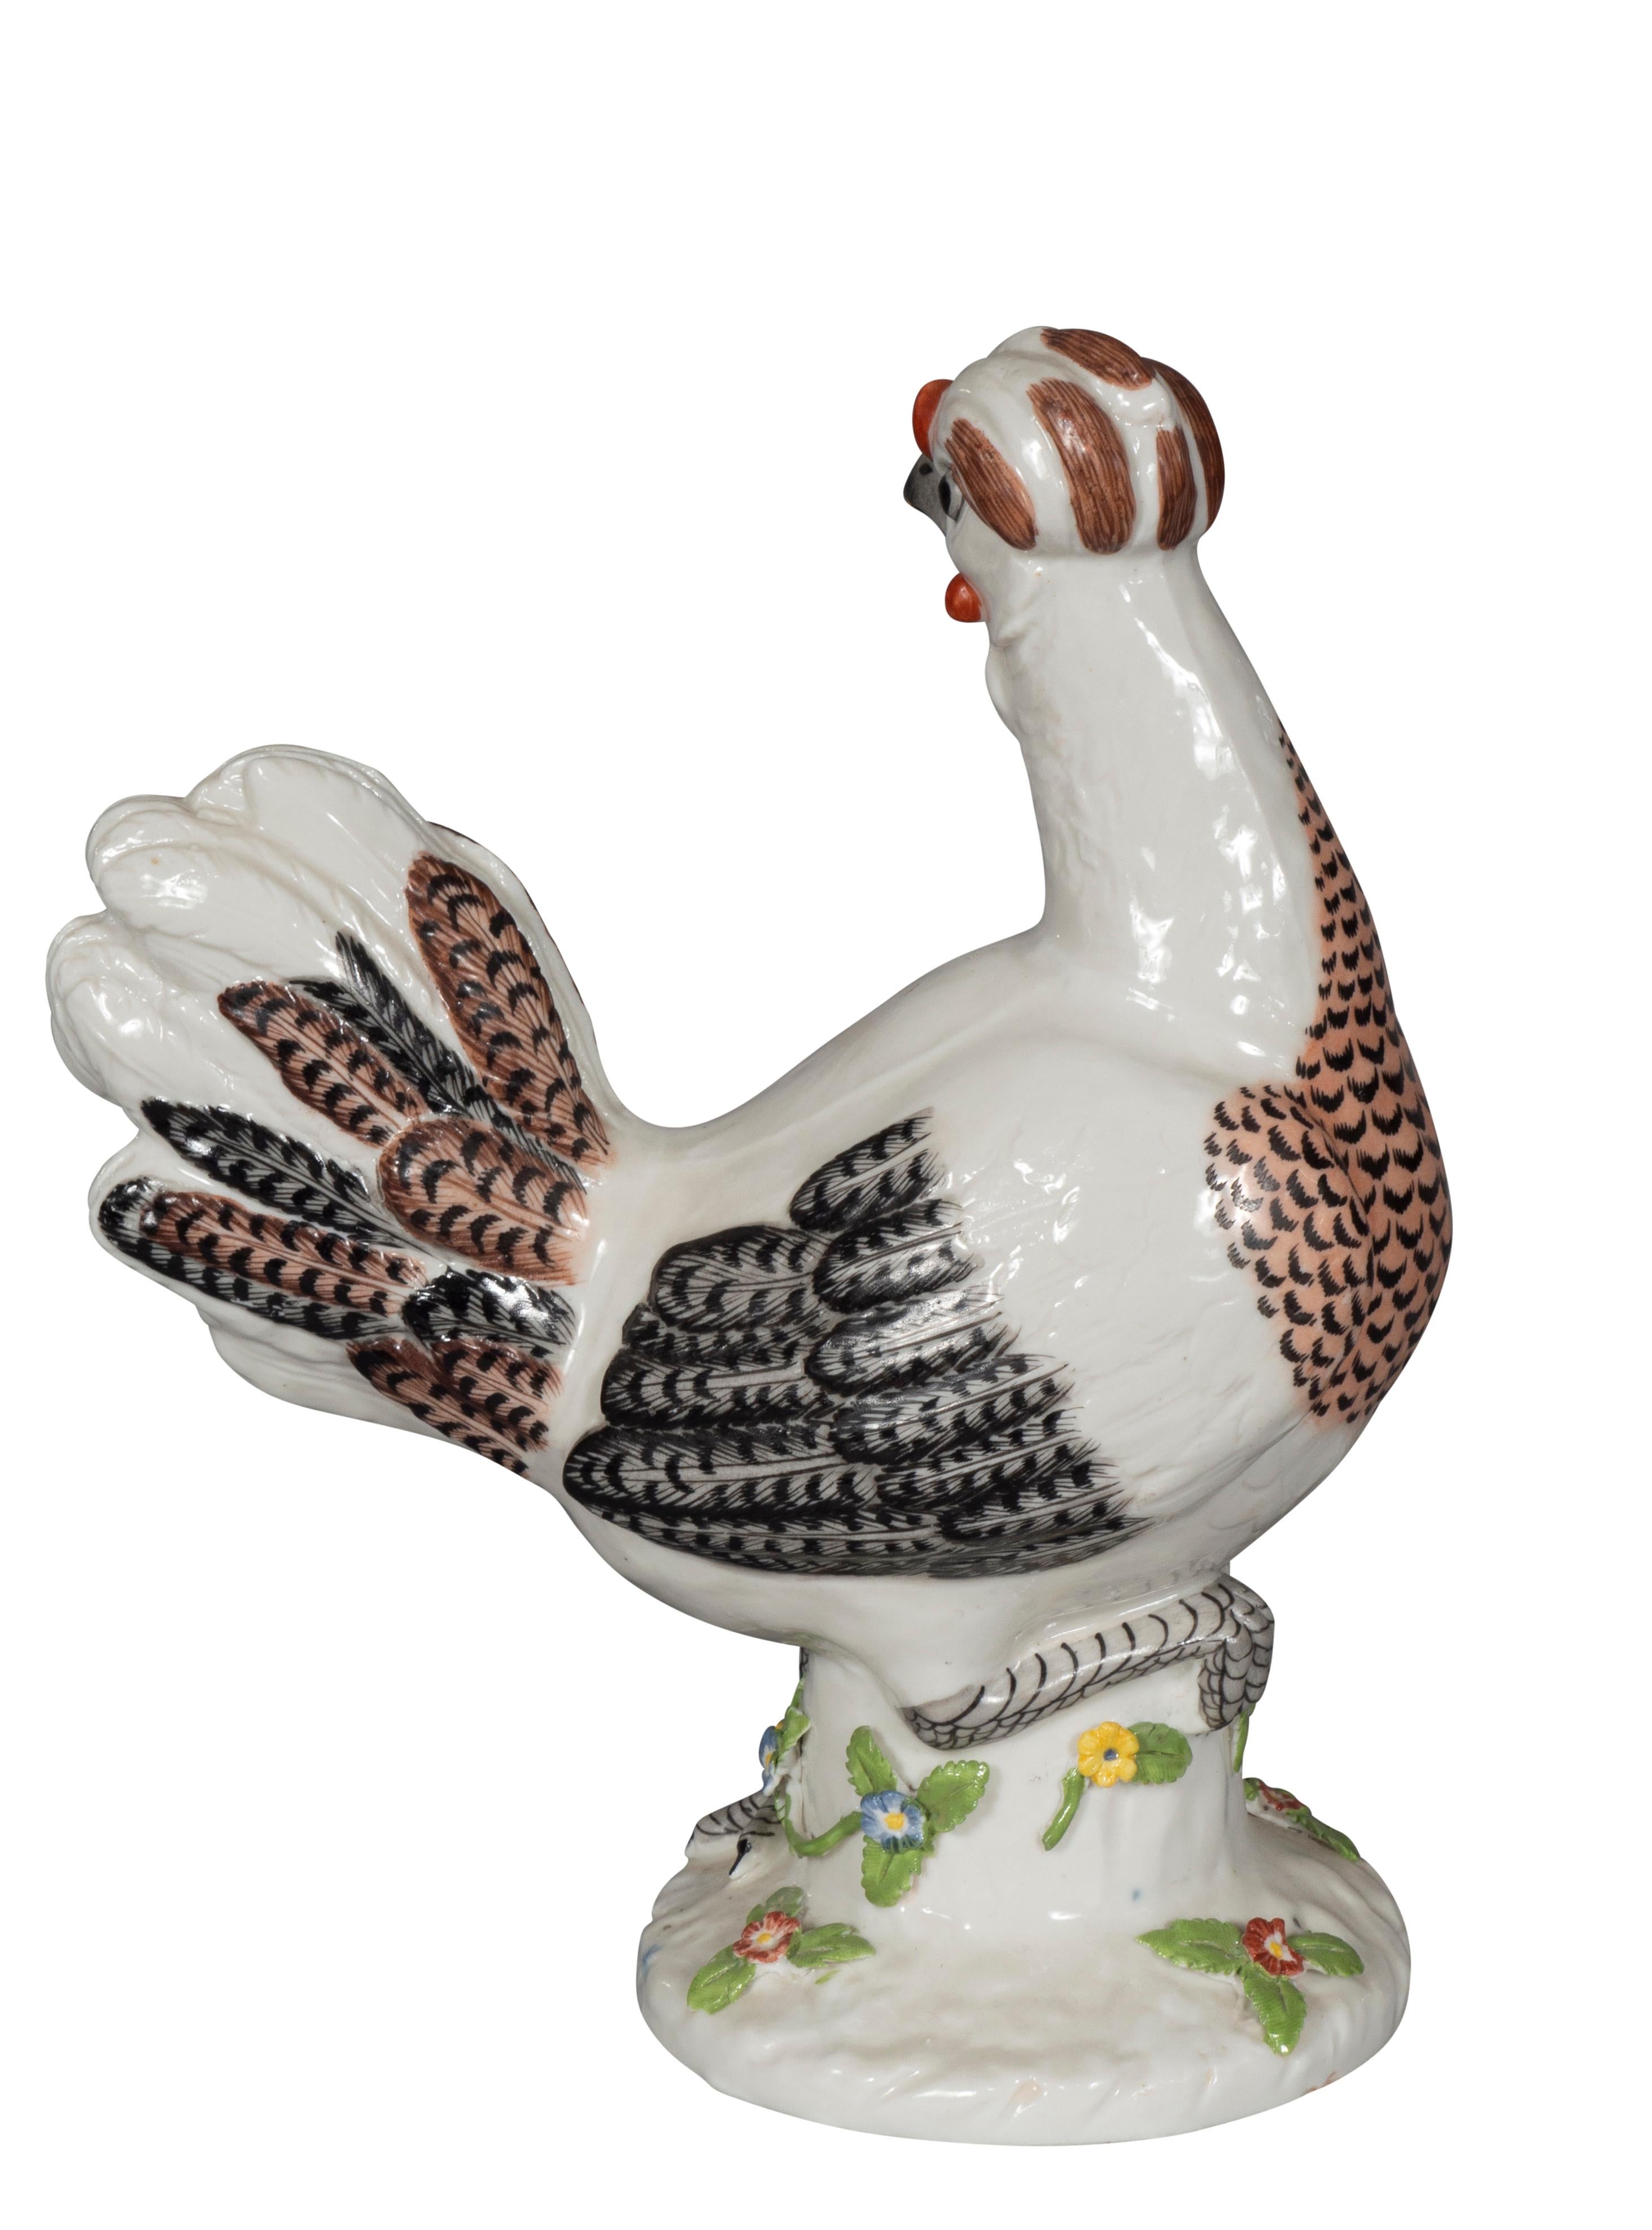 Pair of European Porcelain Roosters For Sale 11